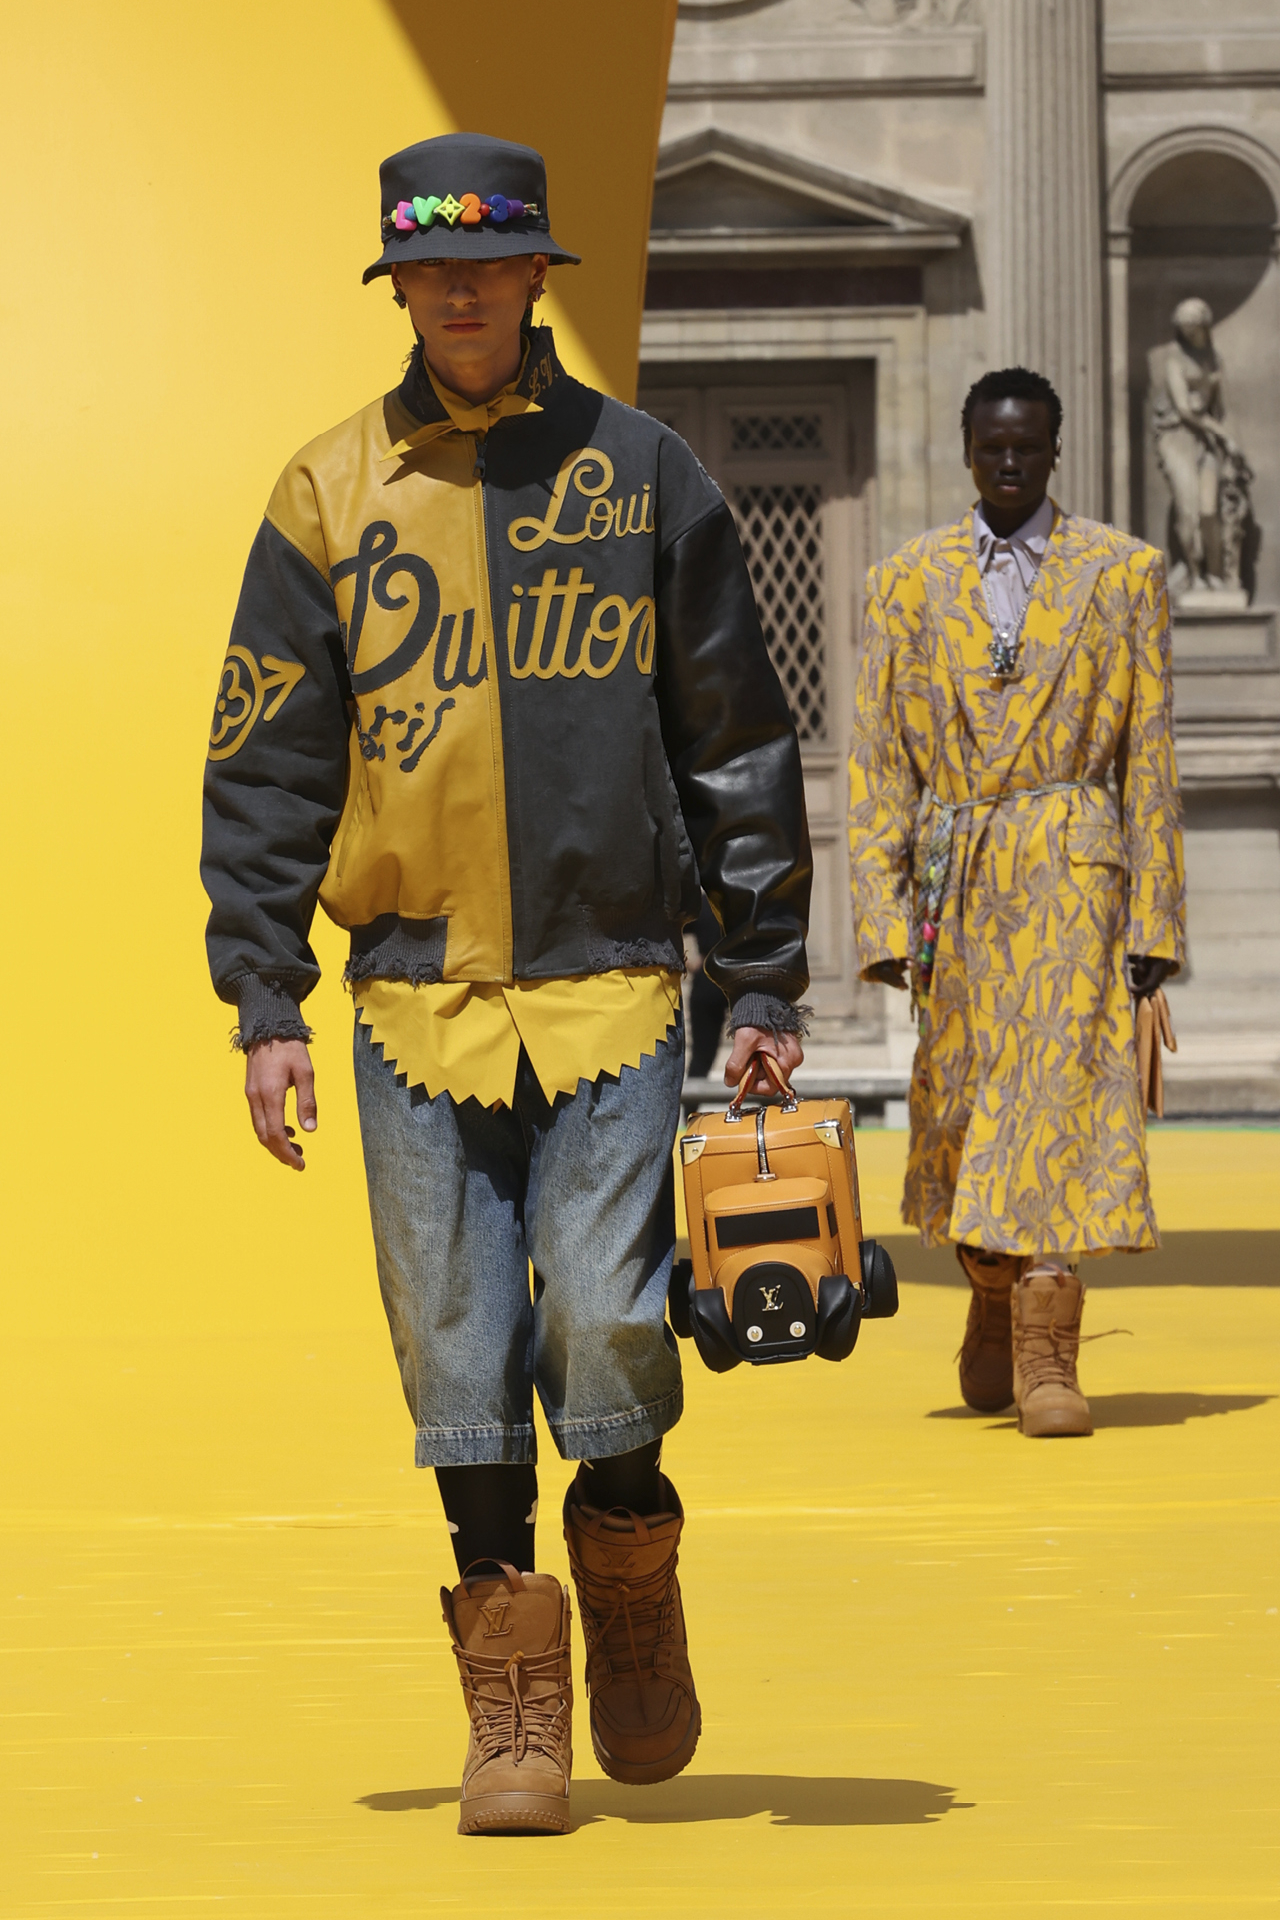 Louis Vuitton Launches Its Spring/ Summer 2022 Campaign